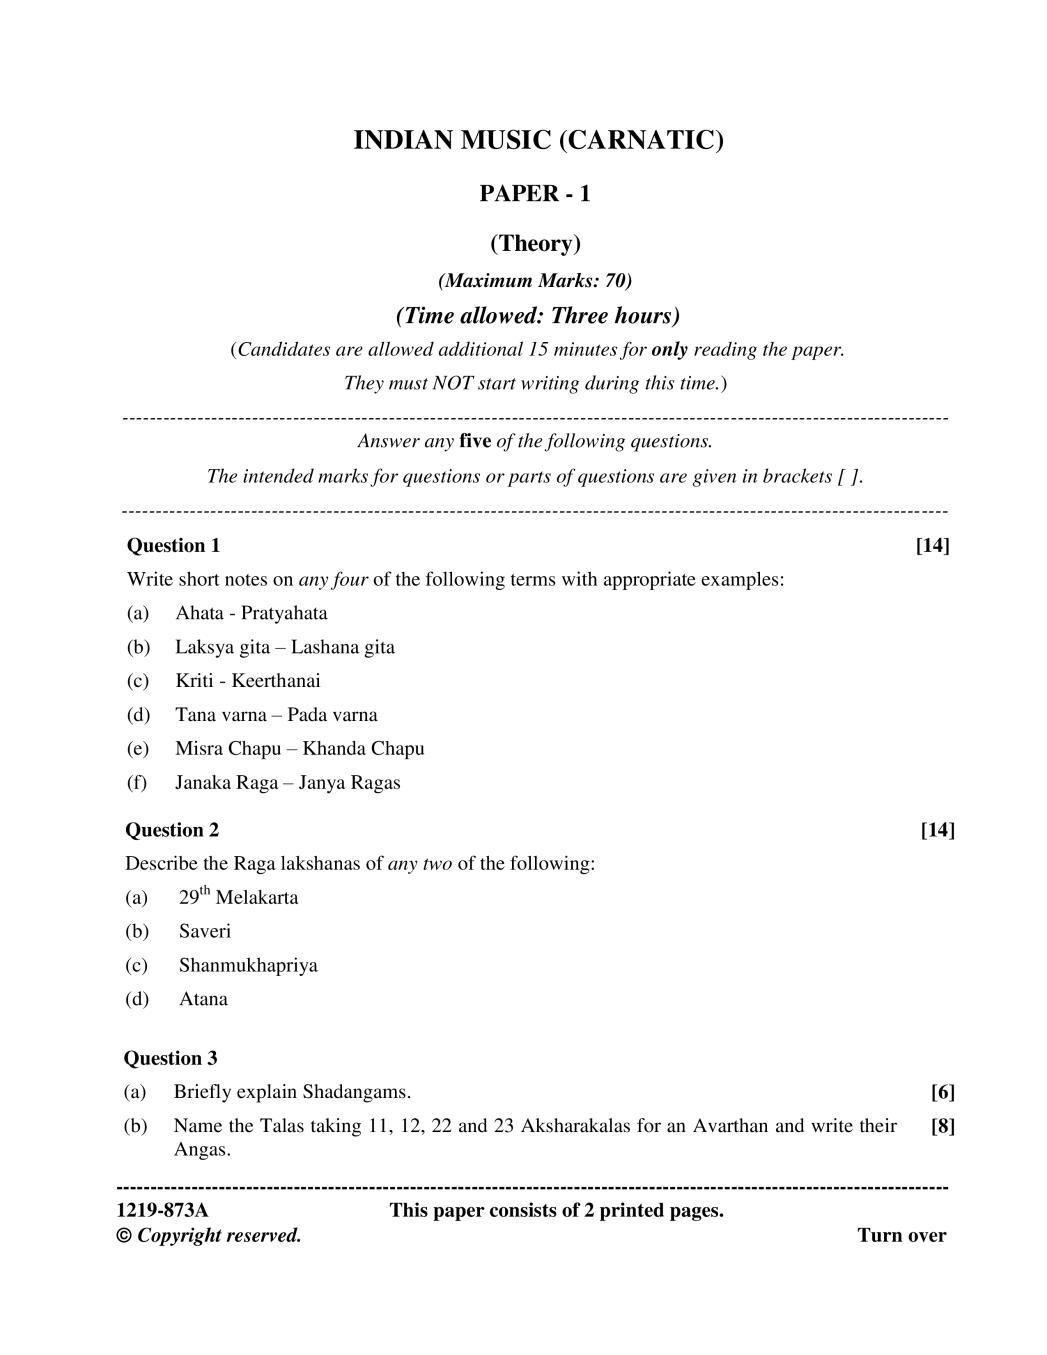 ISC Class 12 Question Paper 2019 for Indian Music Carnatic Paper 1 - Page 1